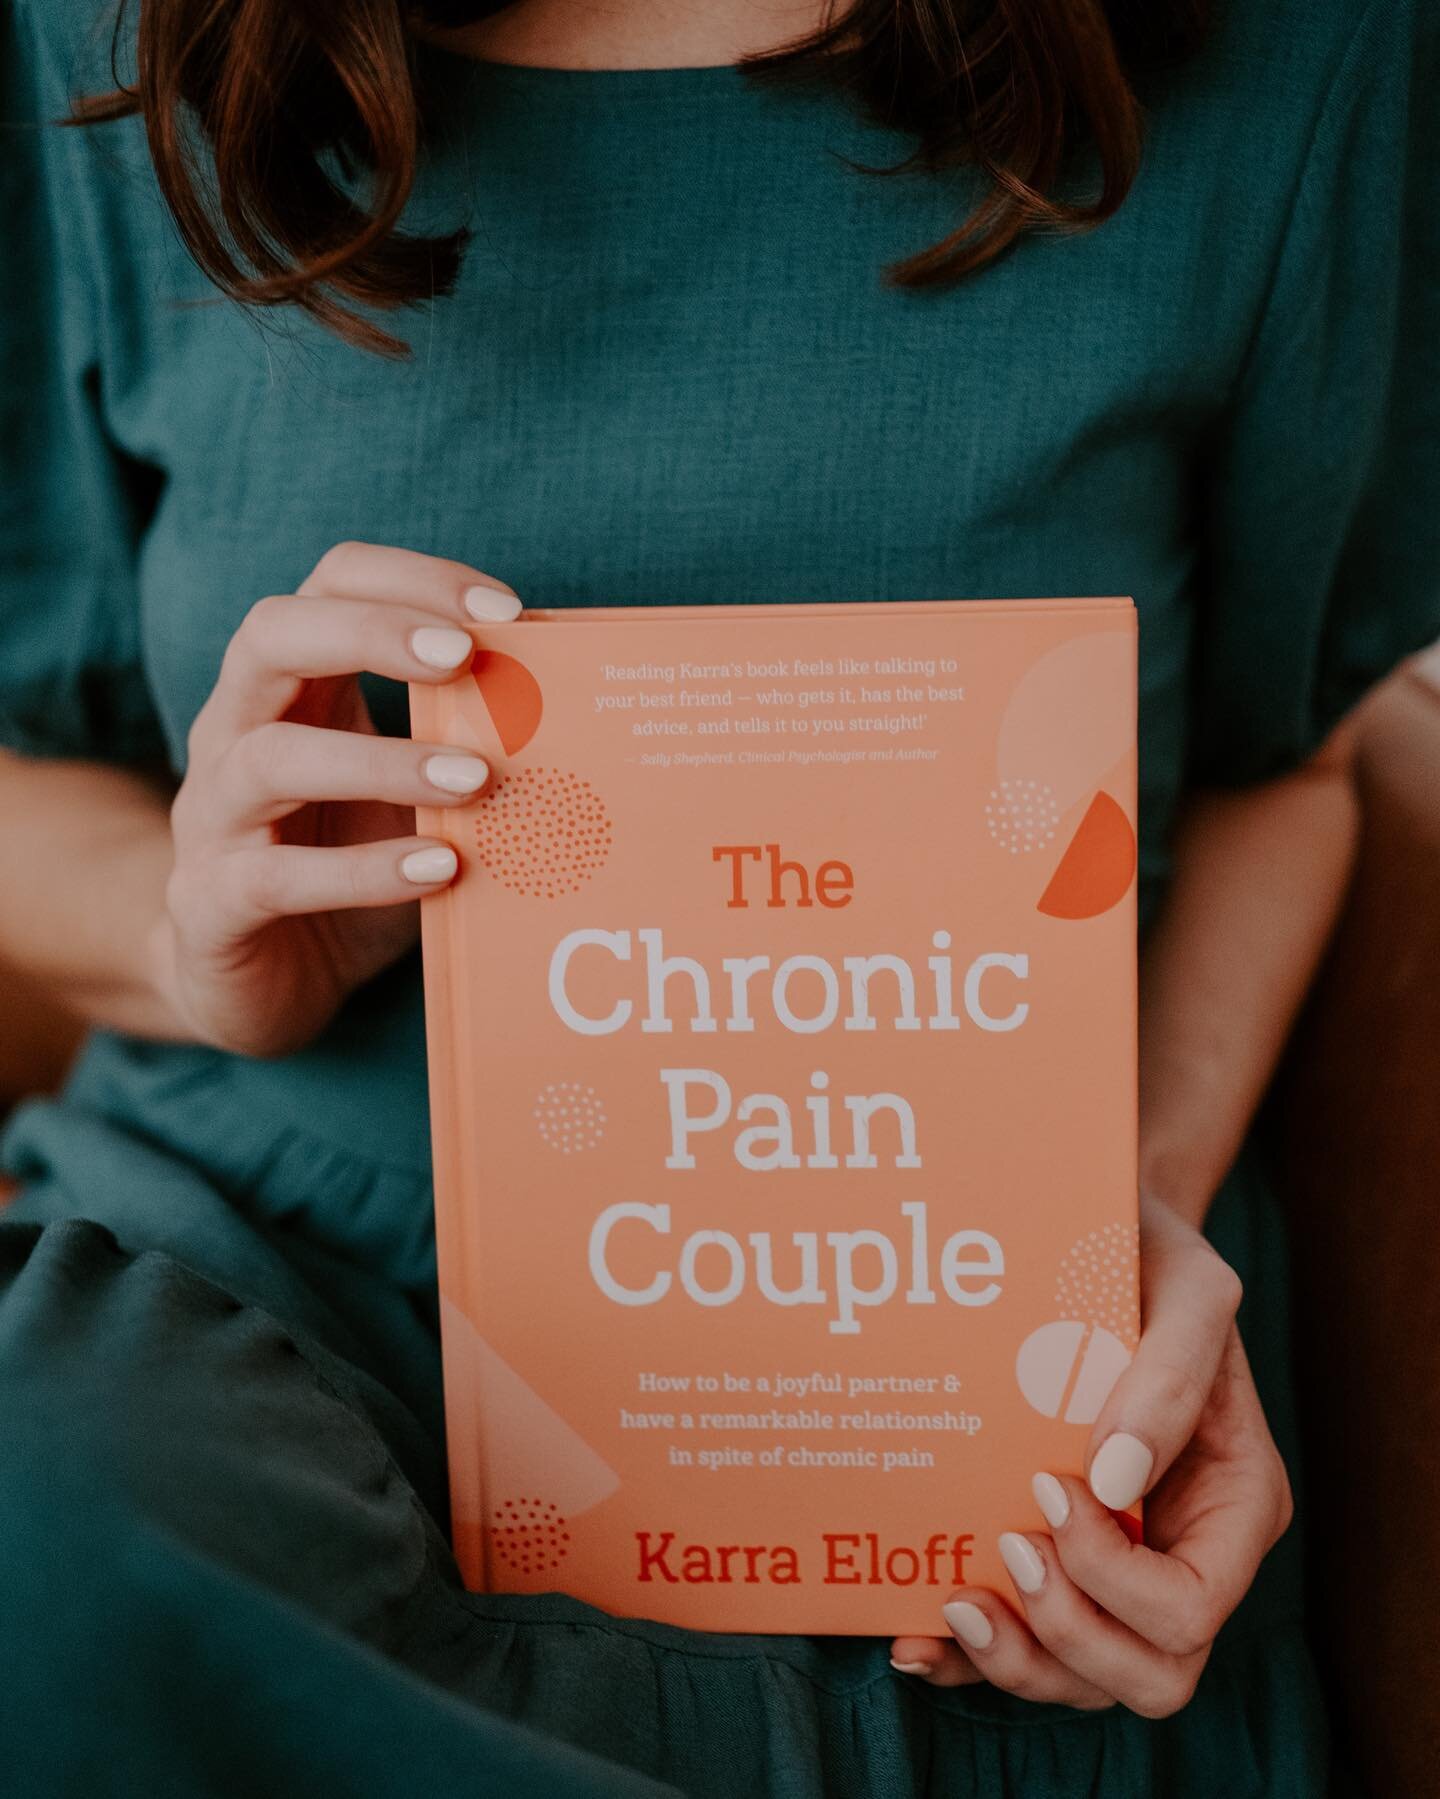 5 facts about The Chronic Pain Couple book you might not know&hellip;

🌟 The book deal was secured by a 50 page book proposal
🌟 Many health professionals have said it helps their patients with long covid and mental health difficulties, not only chr